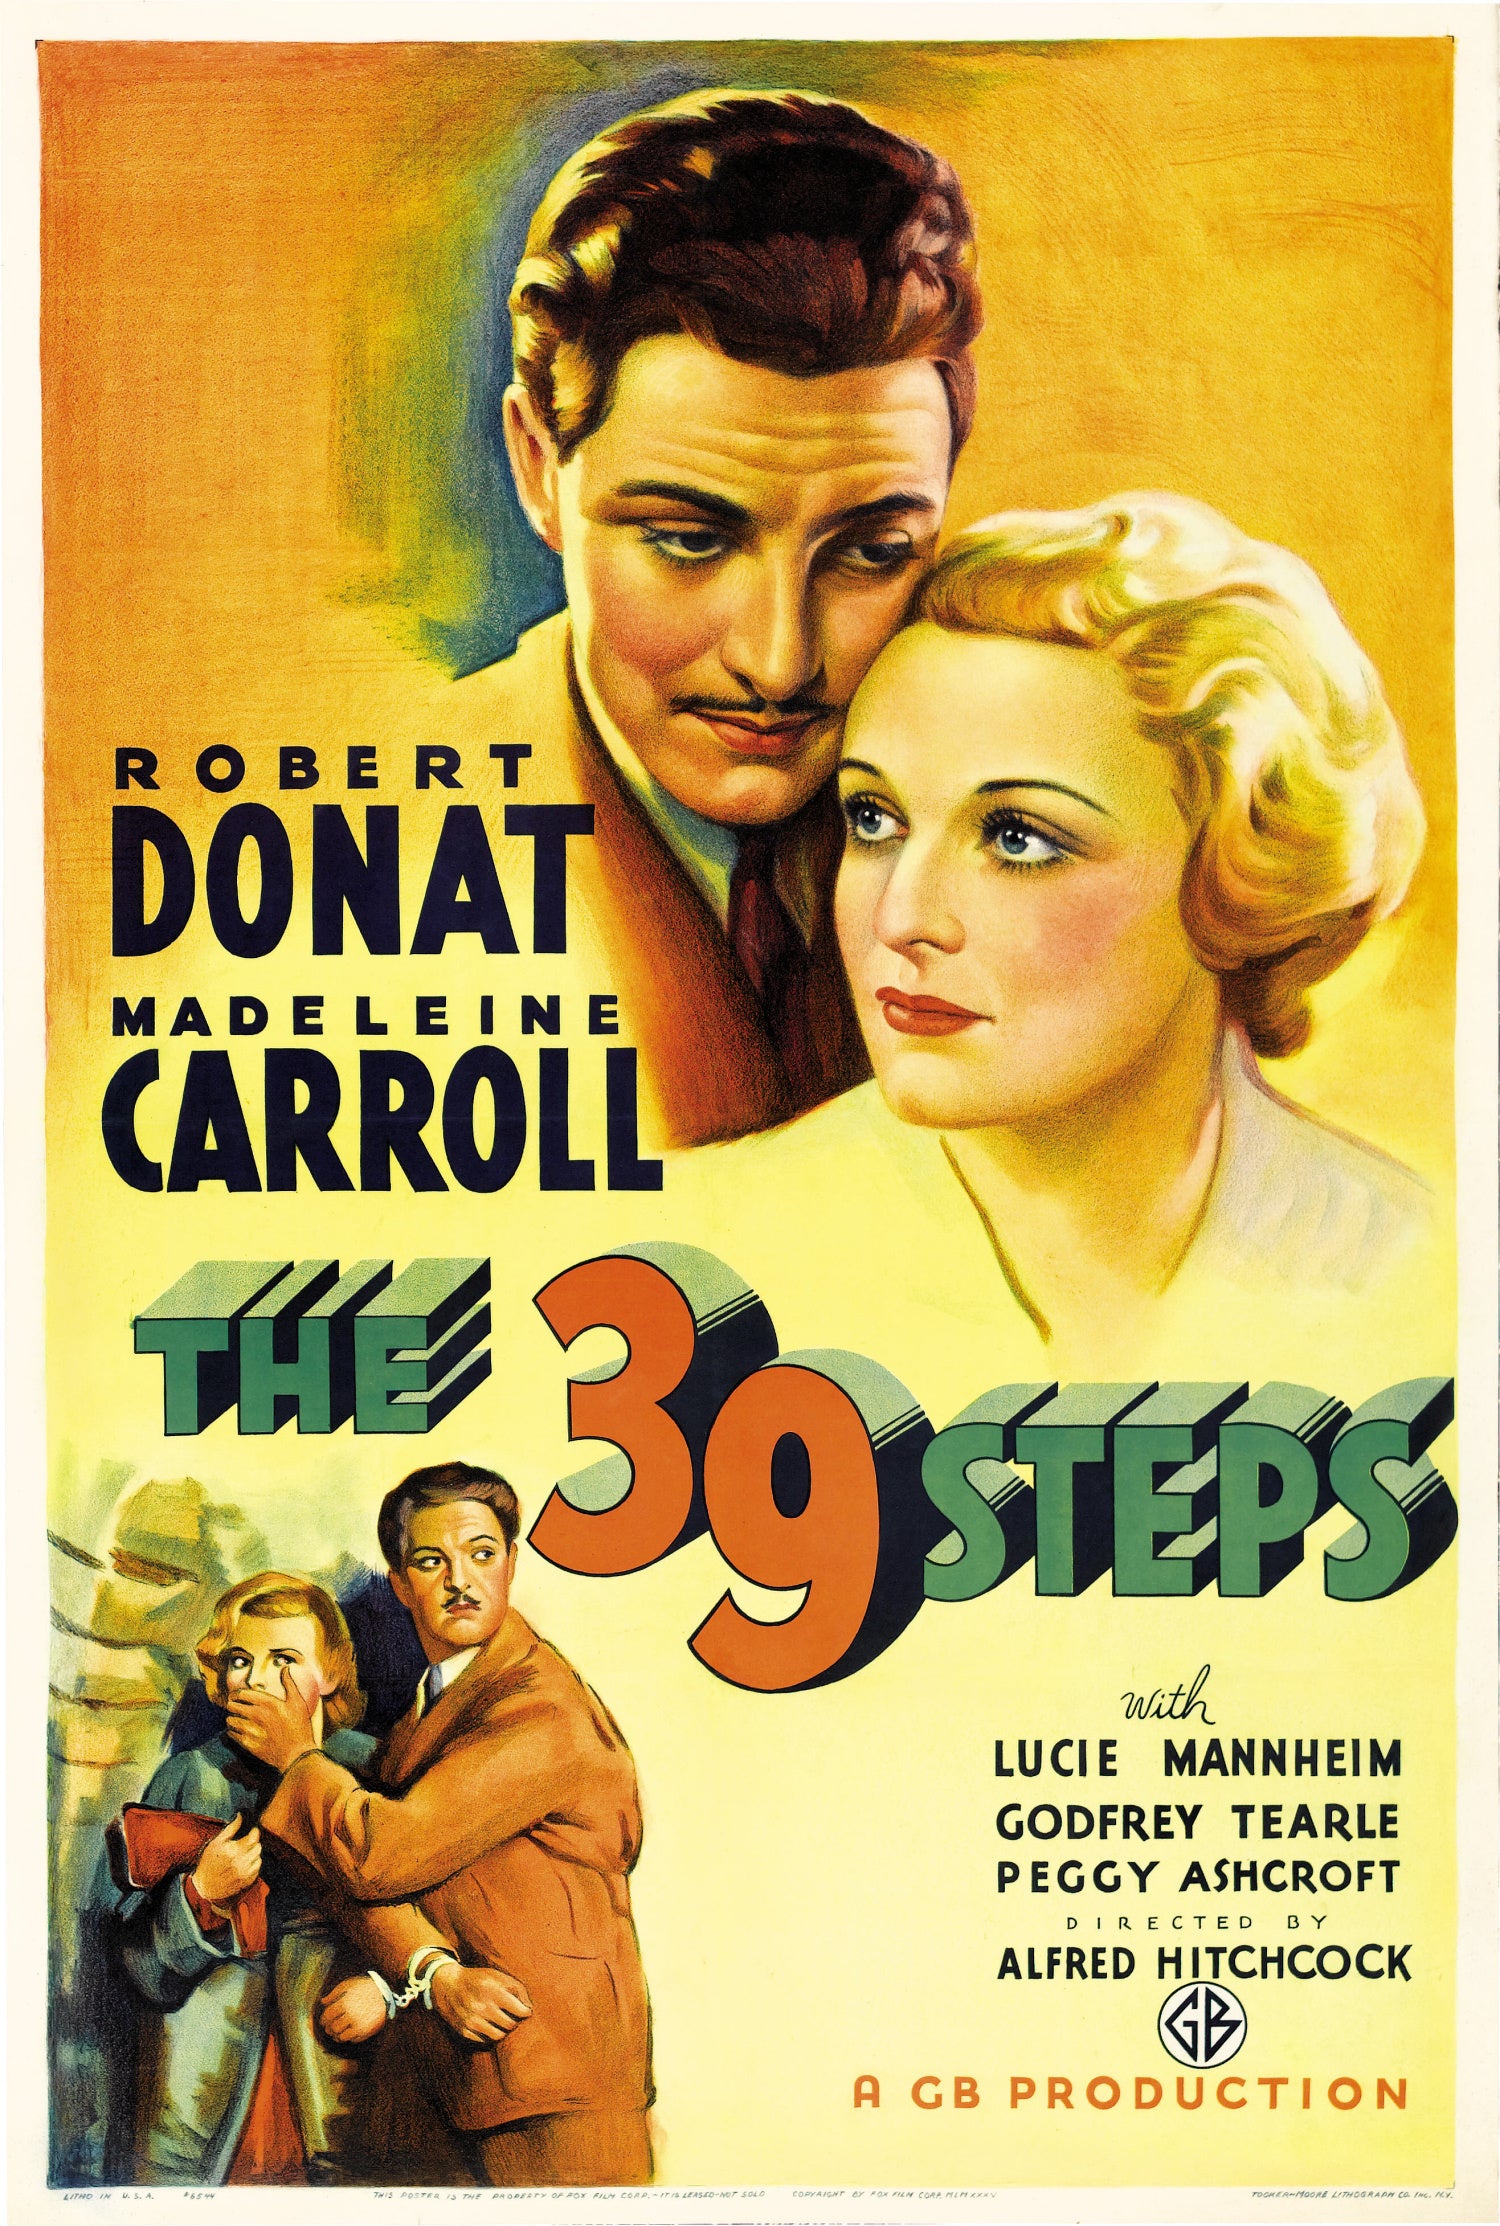 The 39 Steps - 1935